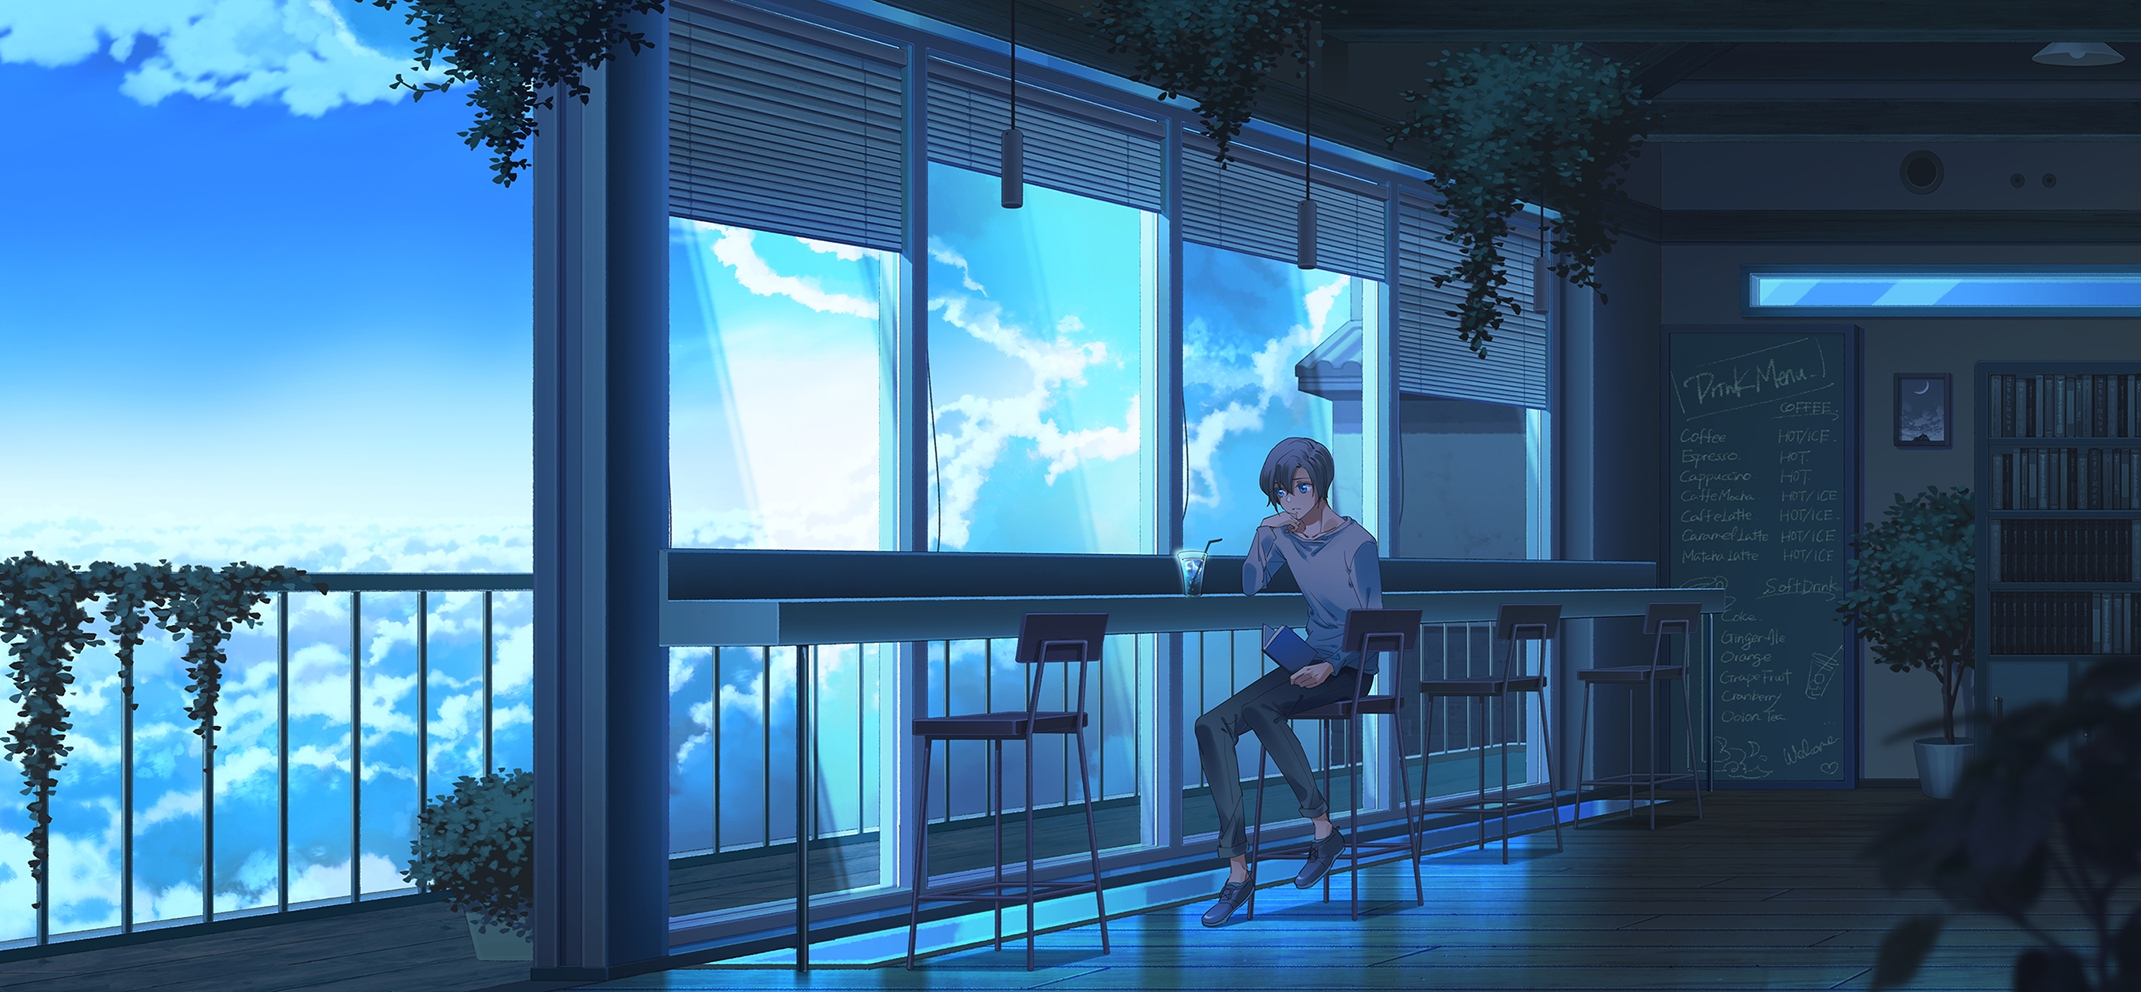 Download 2141x992 Anime Boy, Cafe, Clouds, Balcony Wallpaper